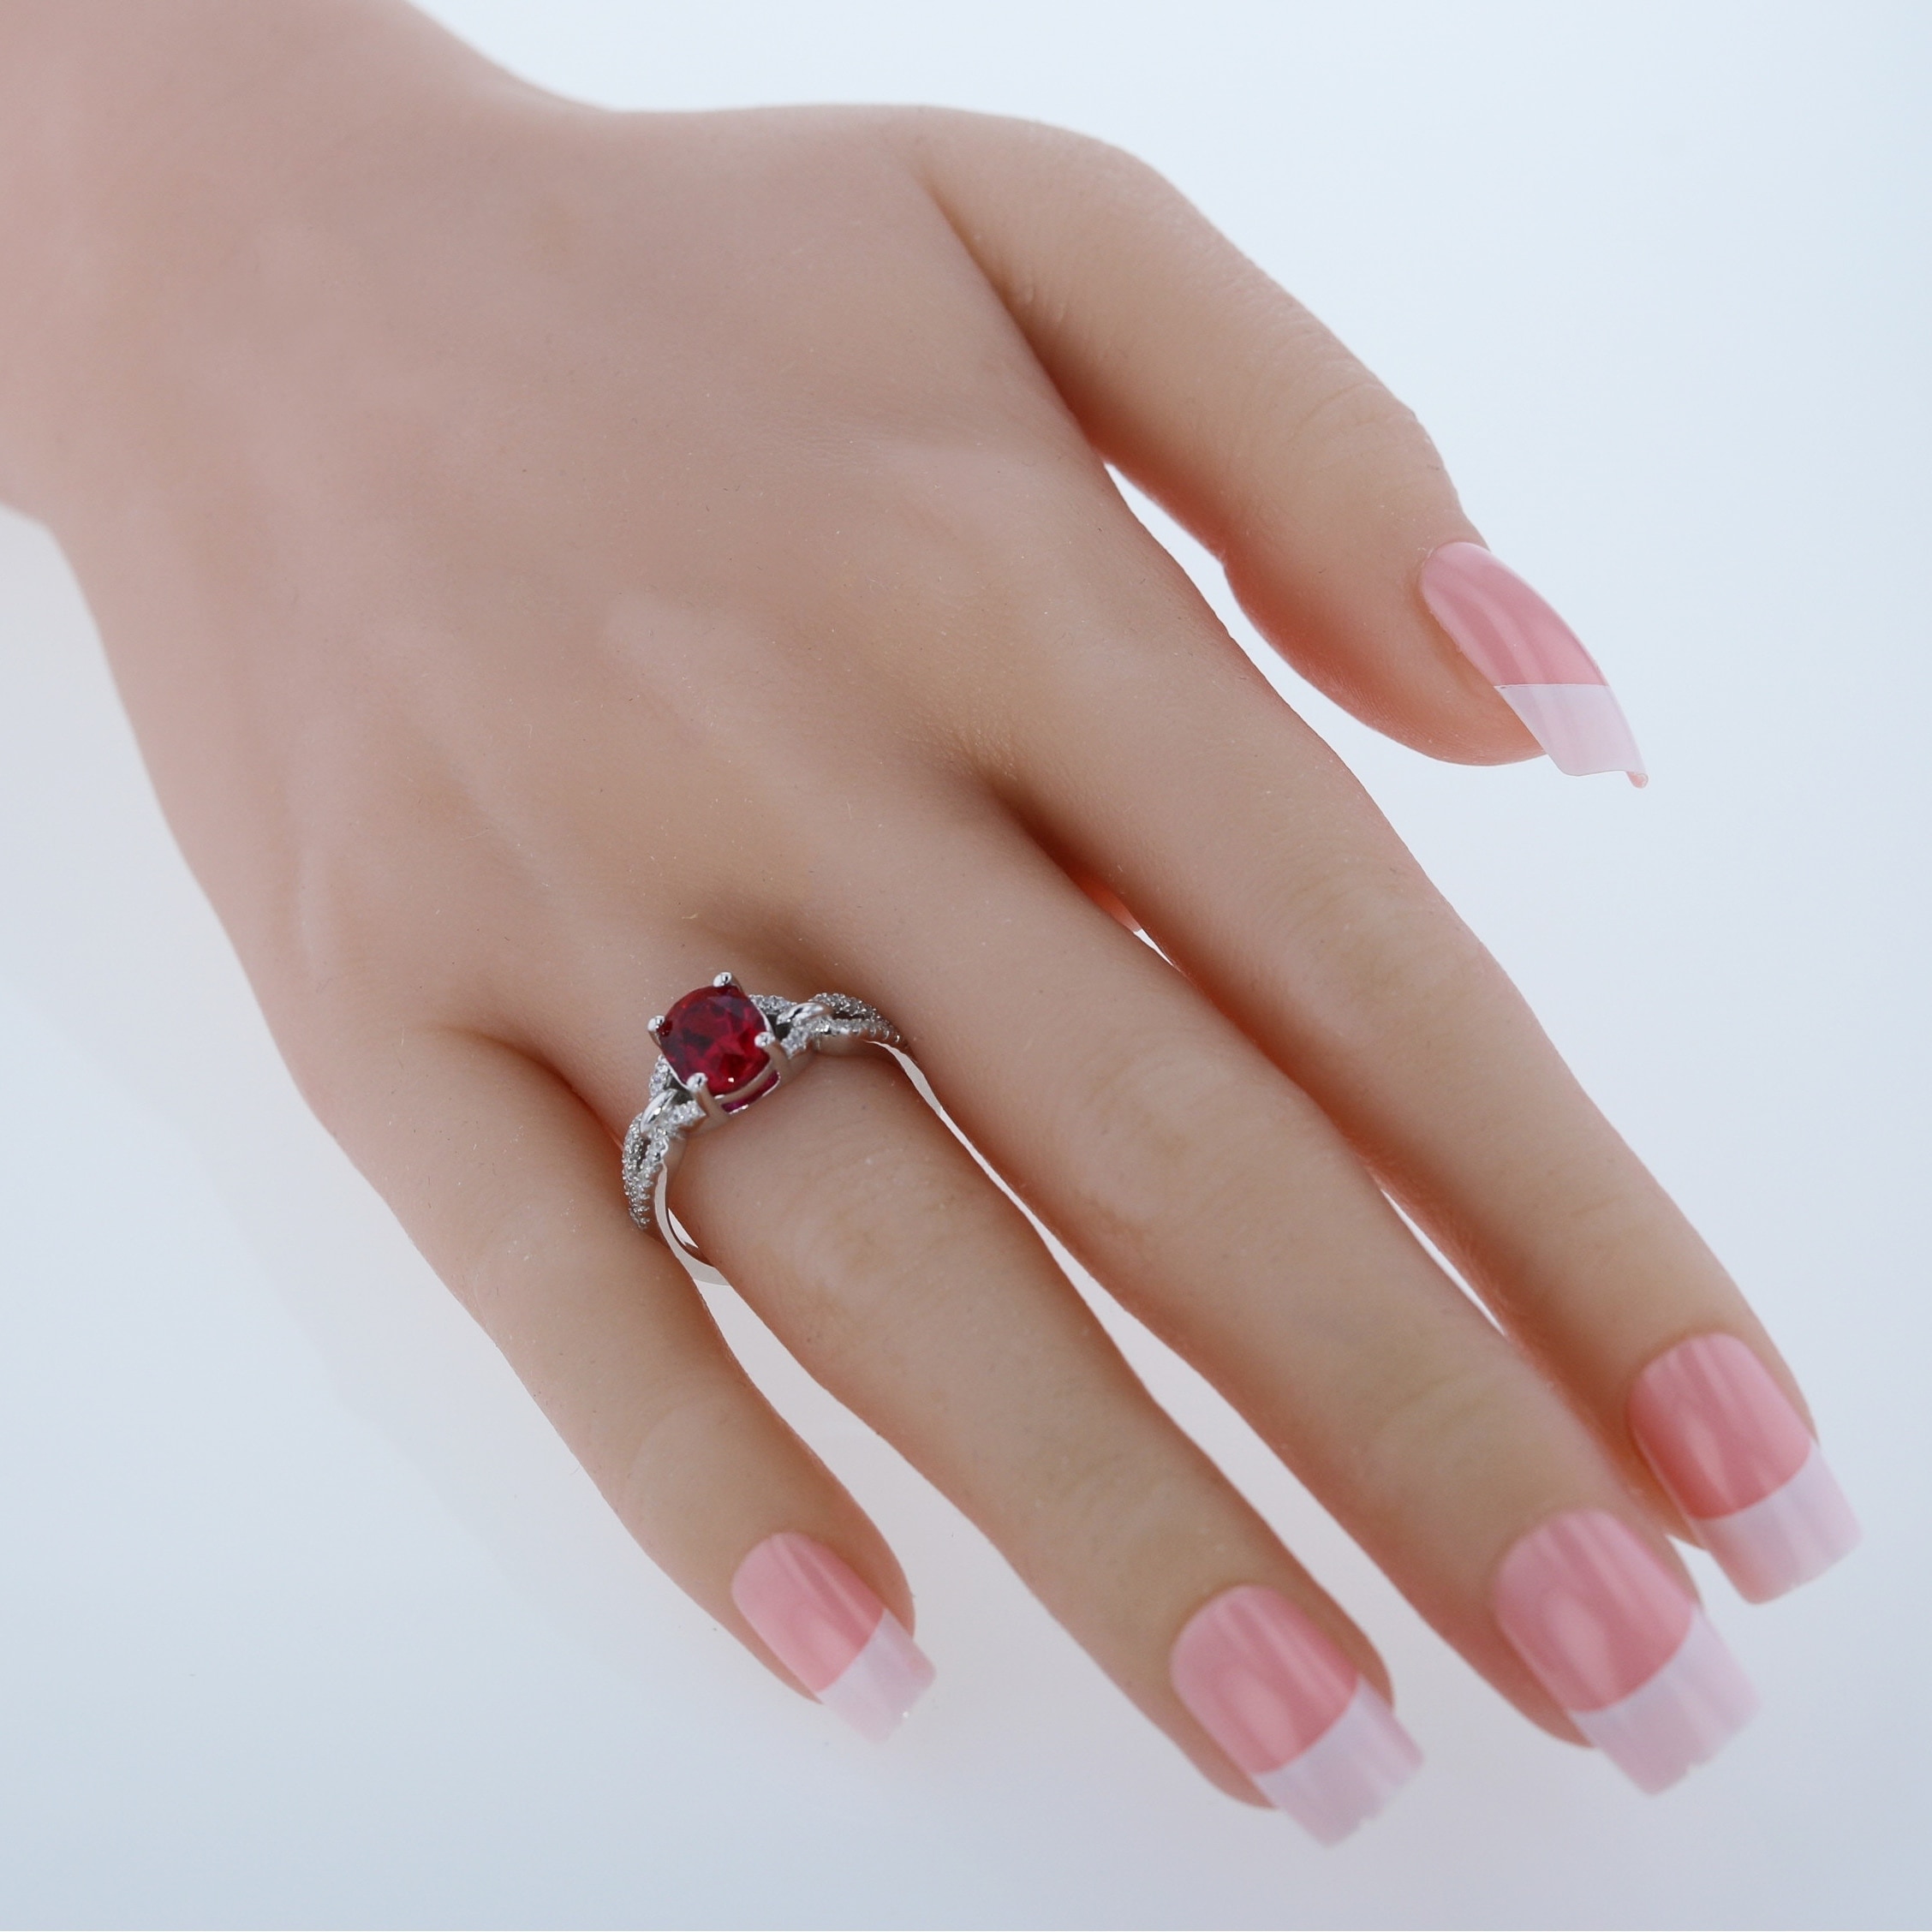 Details about   925 Sterling Silver Natural Ruby Oval Shape Gemstone Handmade Engagement Ring 